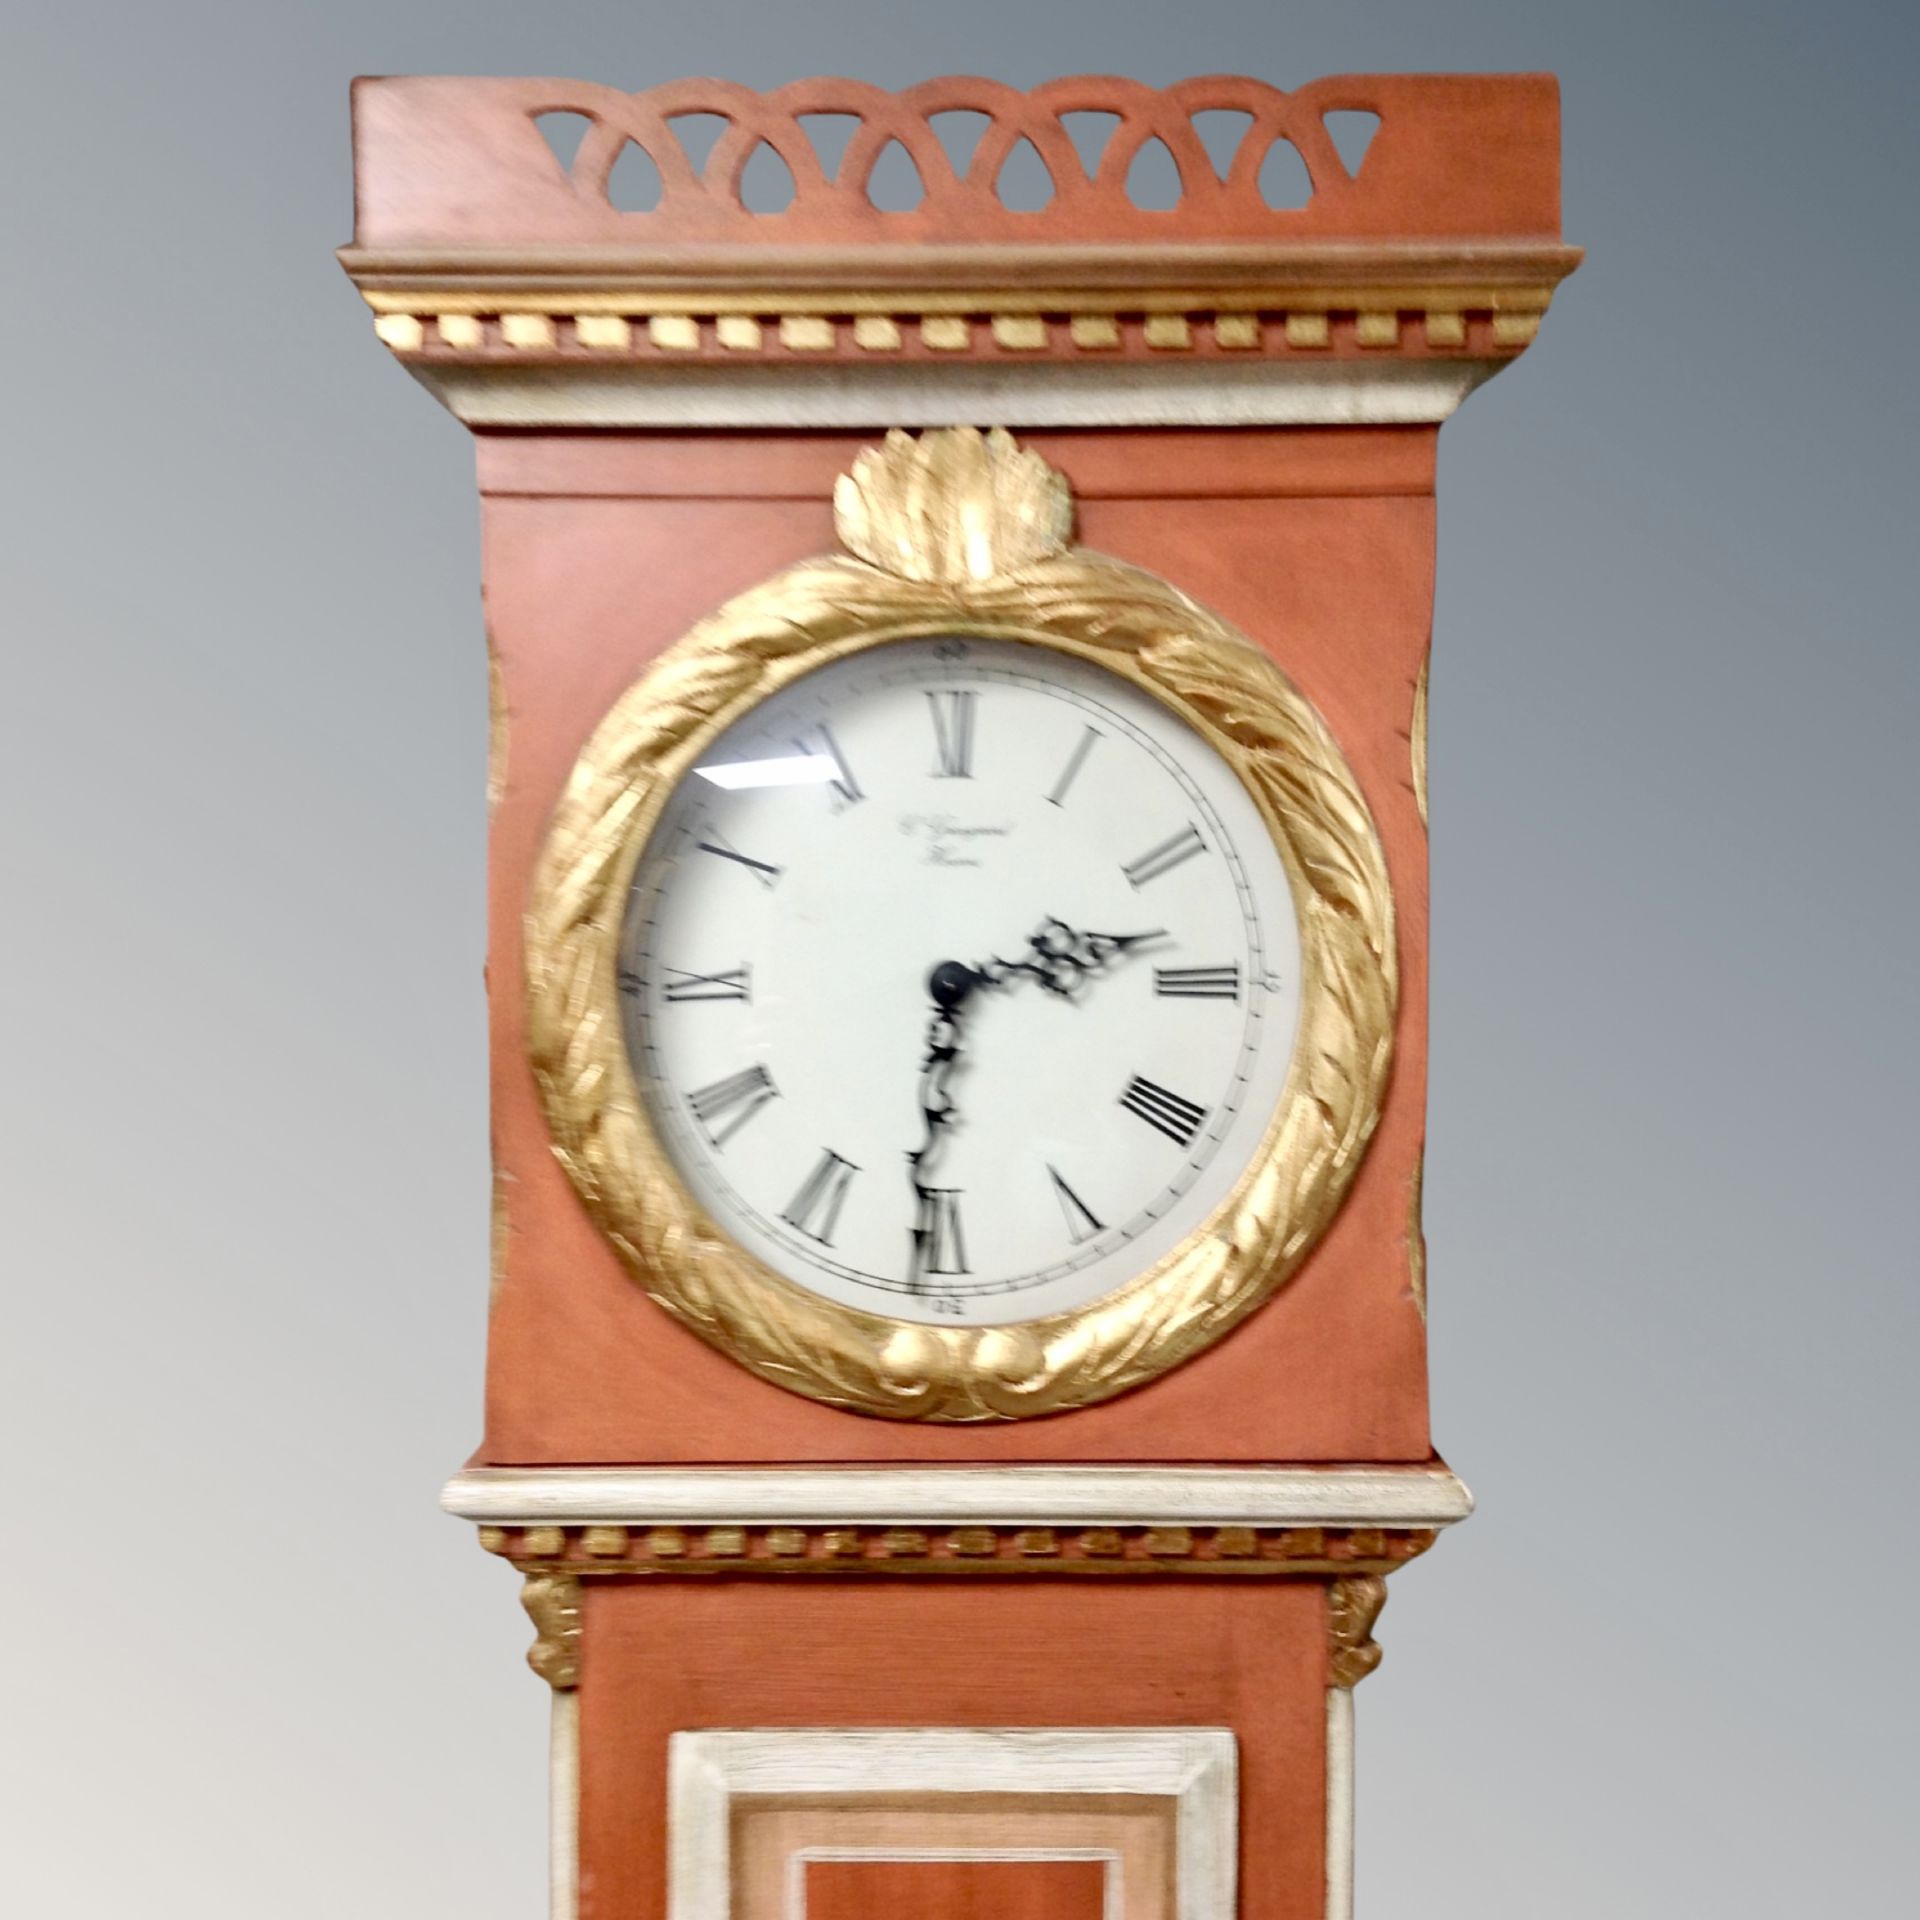 A Scandinavian painted longcase clock with pendulum and weights - Image 2 of 2